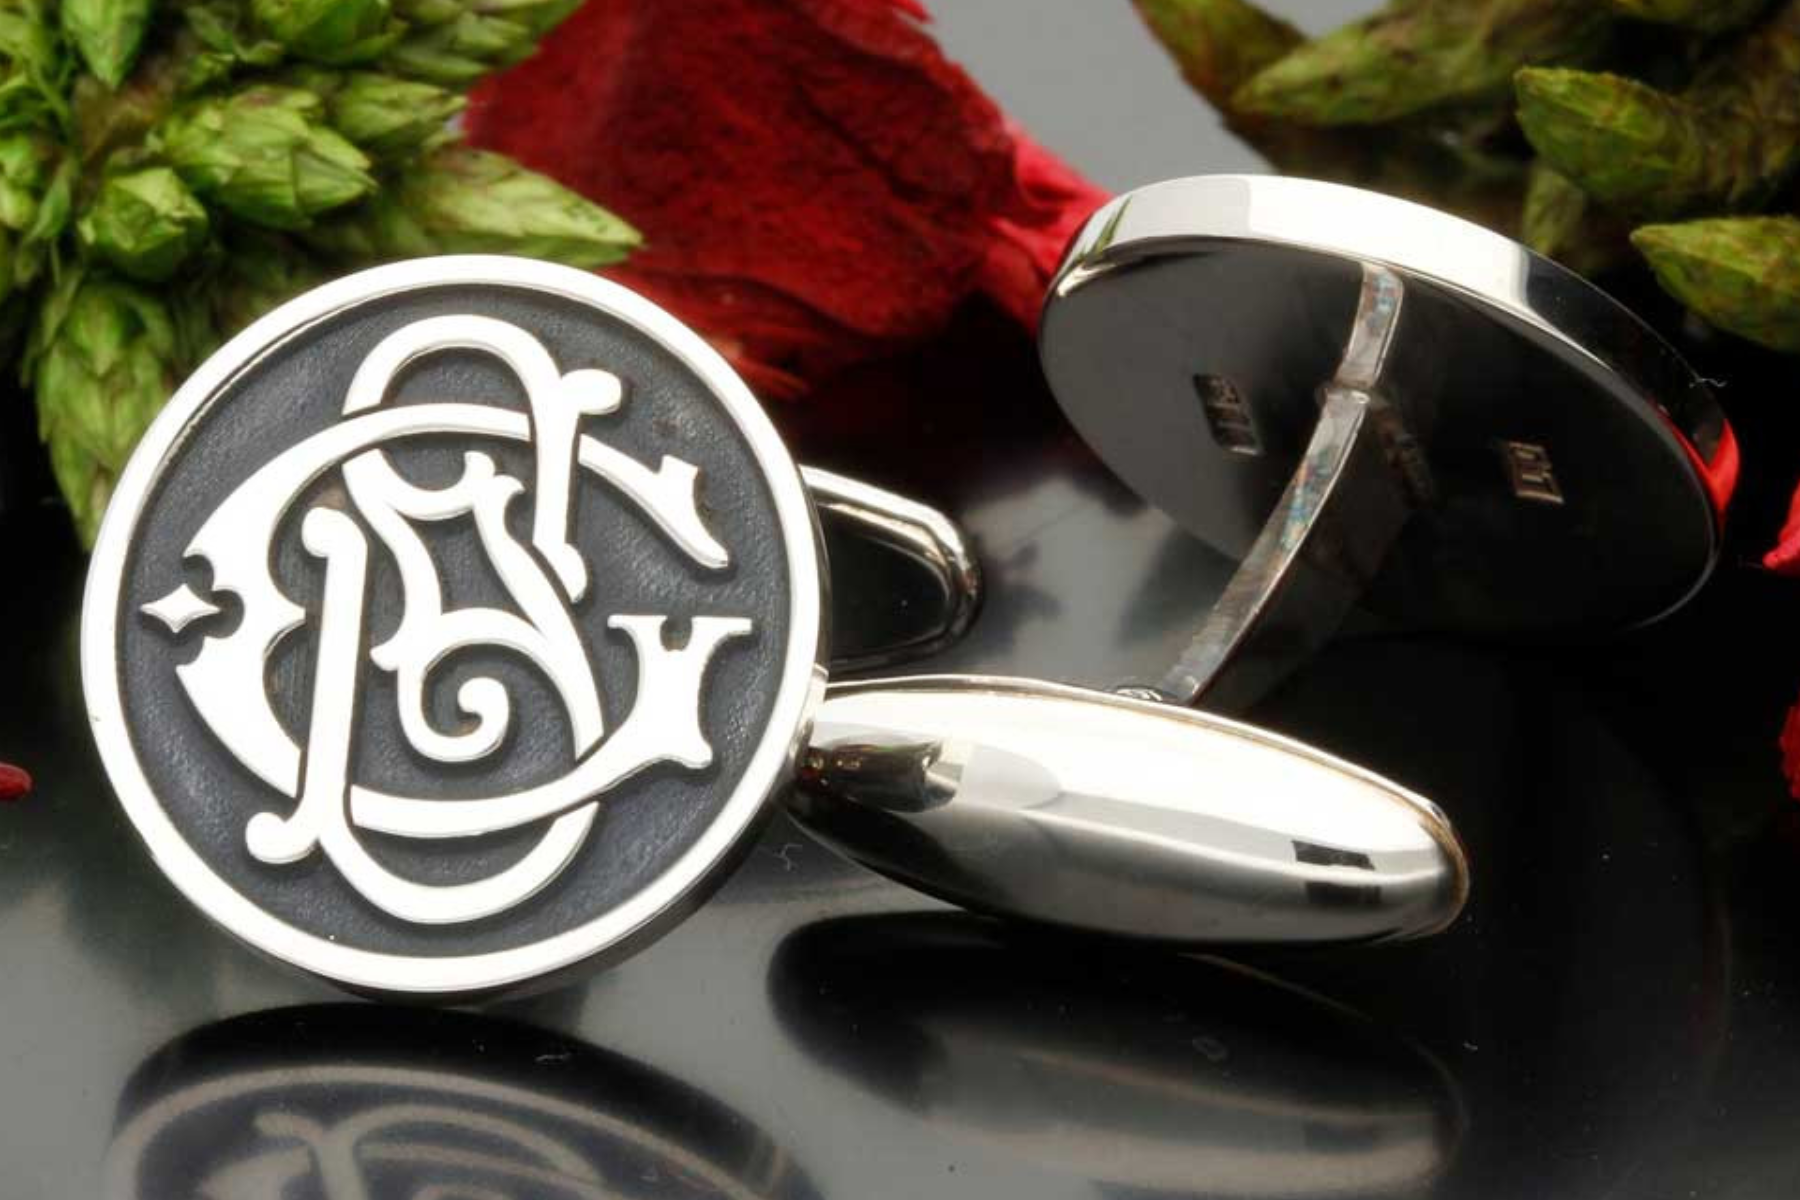 A pair of monogrammed cufflinks displayed on a glass table